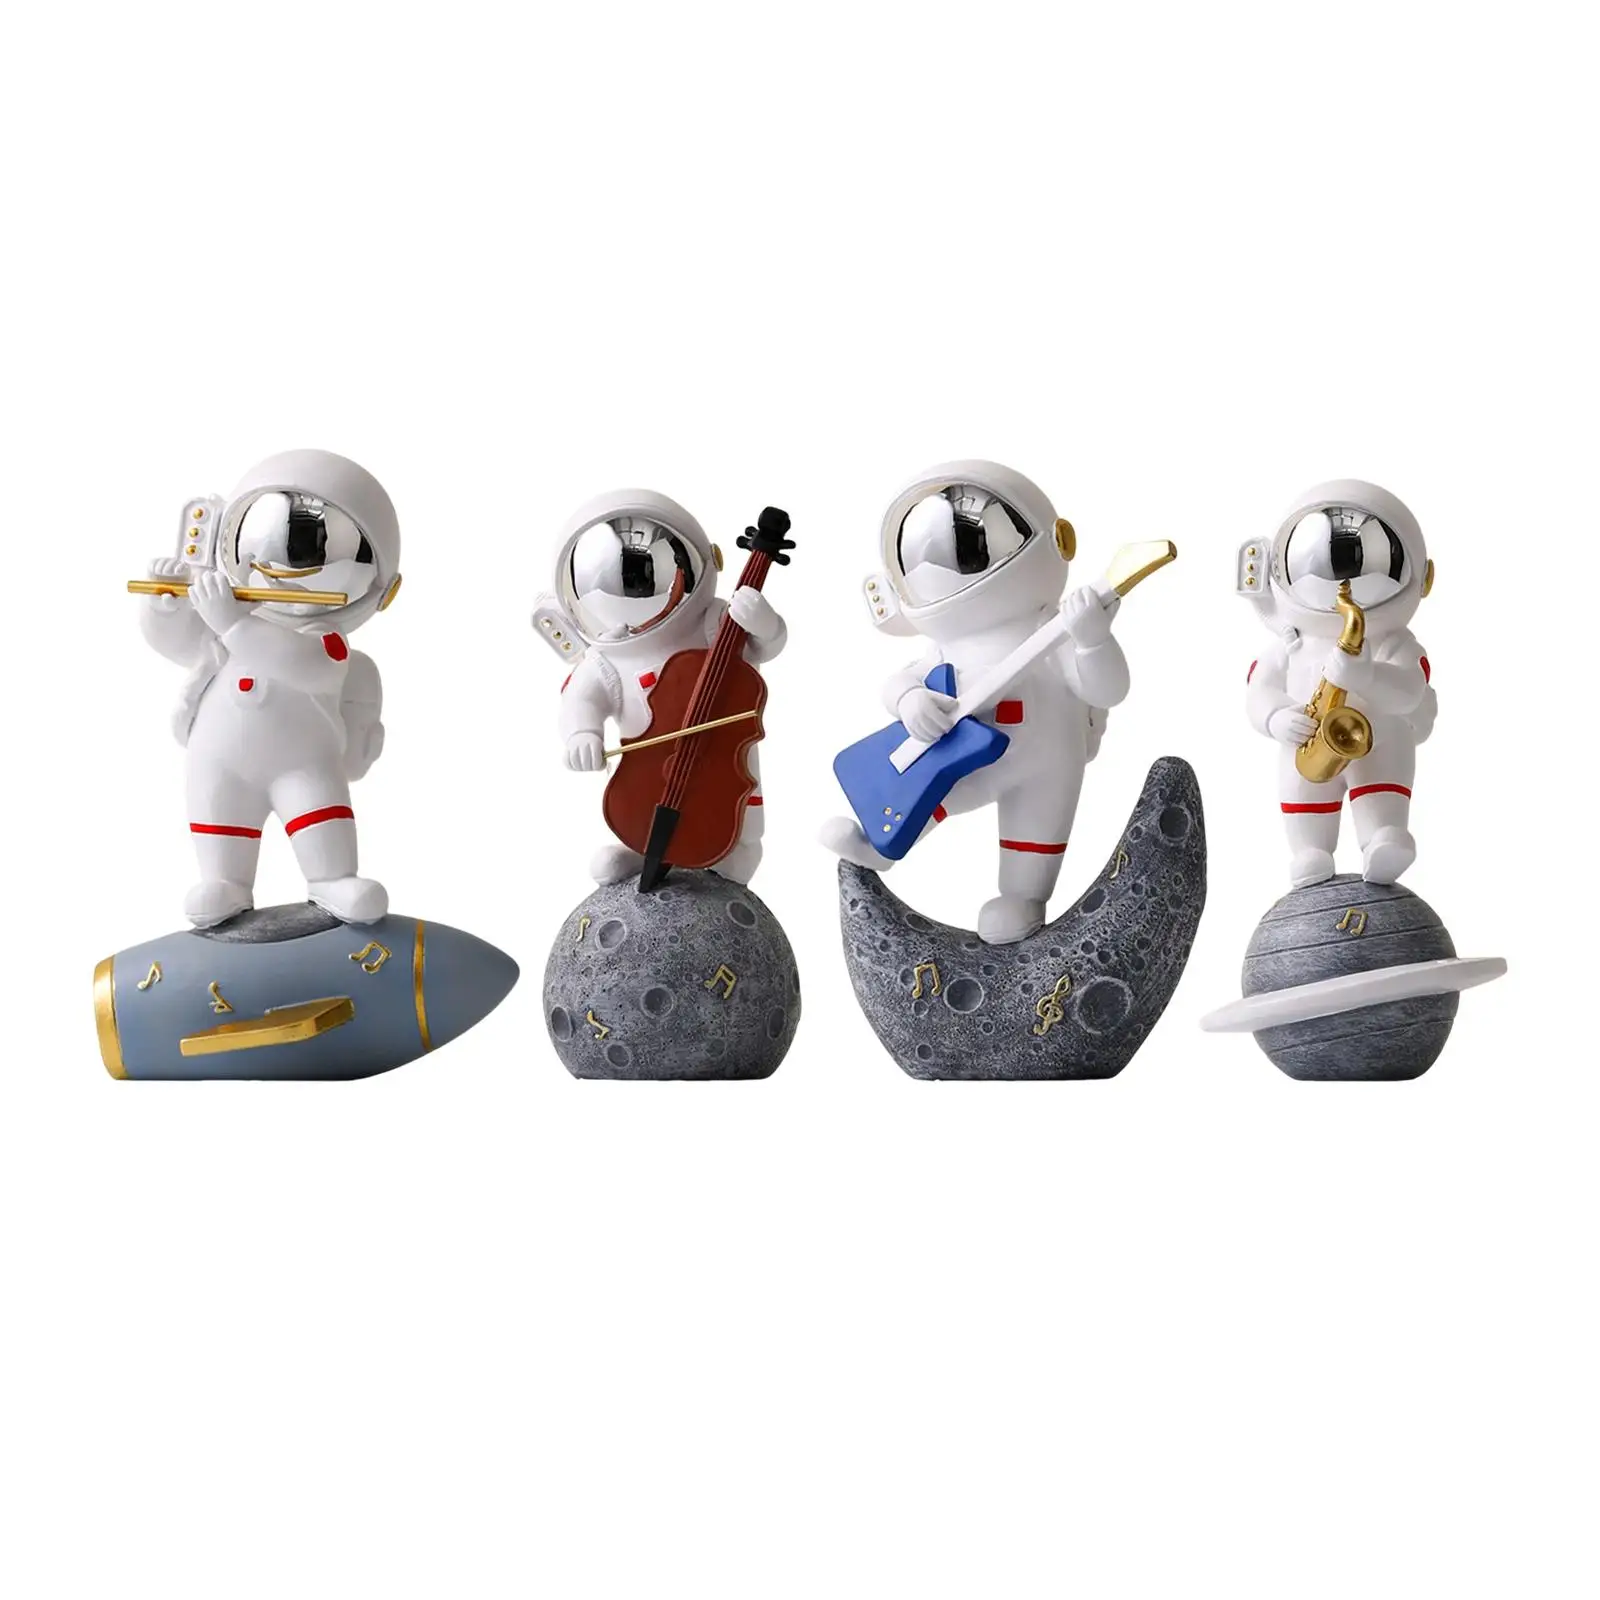 

Astronaut Figurine Statue Music Ornament Sculpture Collectible Spaceman Resin for Home Tabletop Bookshelf Bedroom Decoration